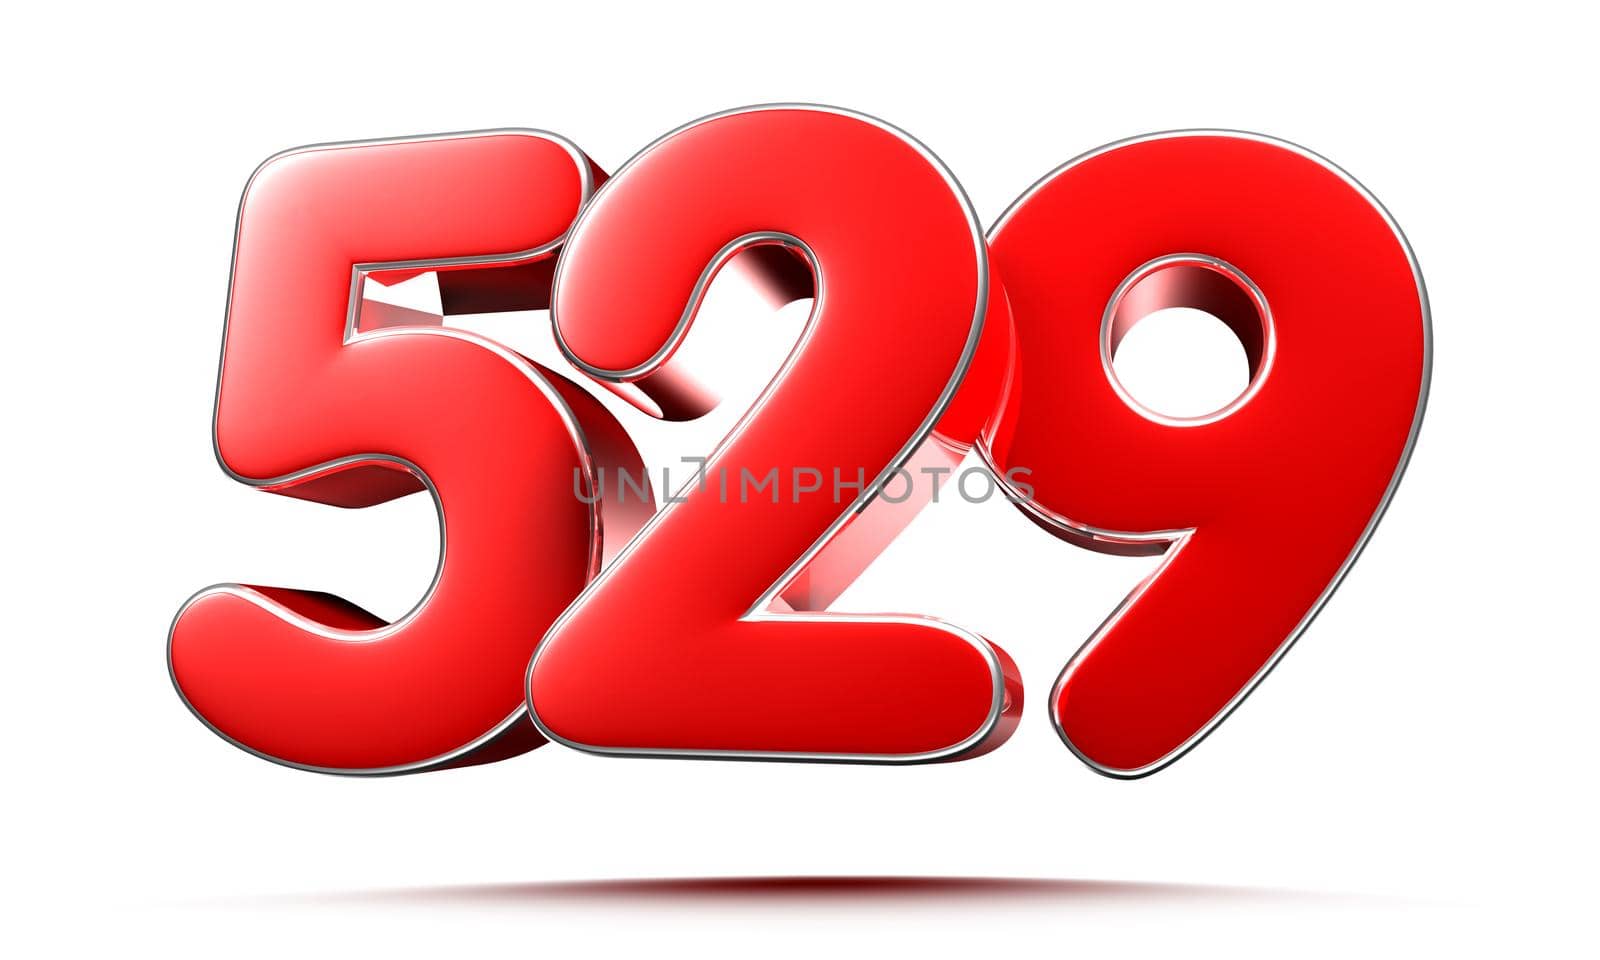 Rounded red numbers 529 on white background 3D illustration with clipping path by thitimontoyai